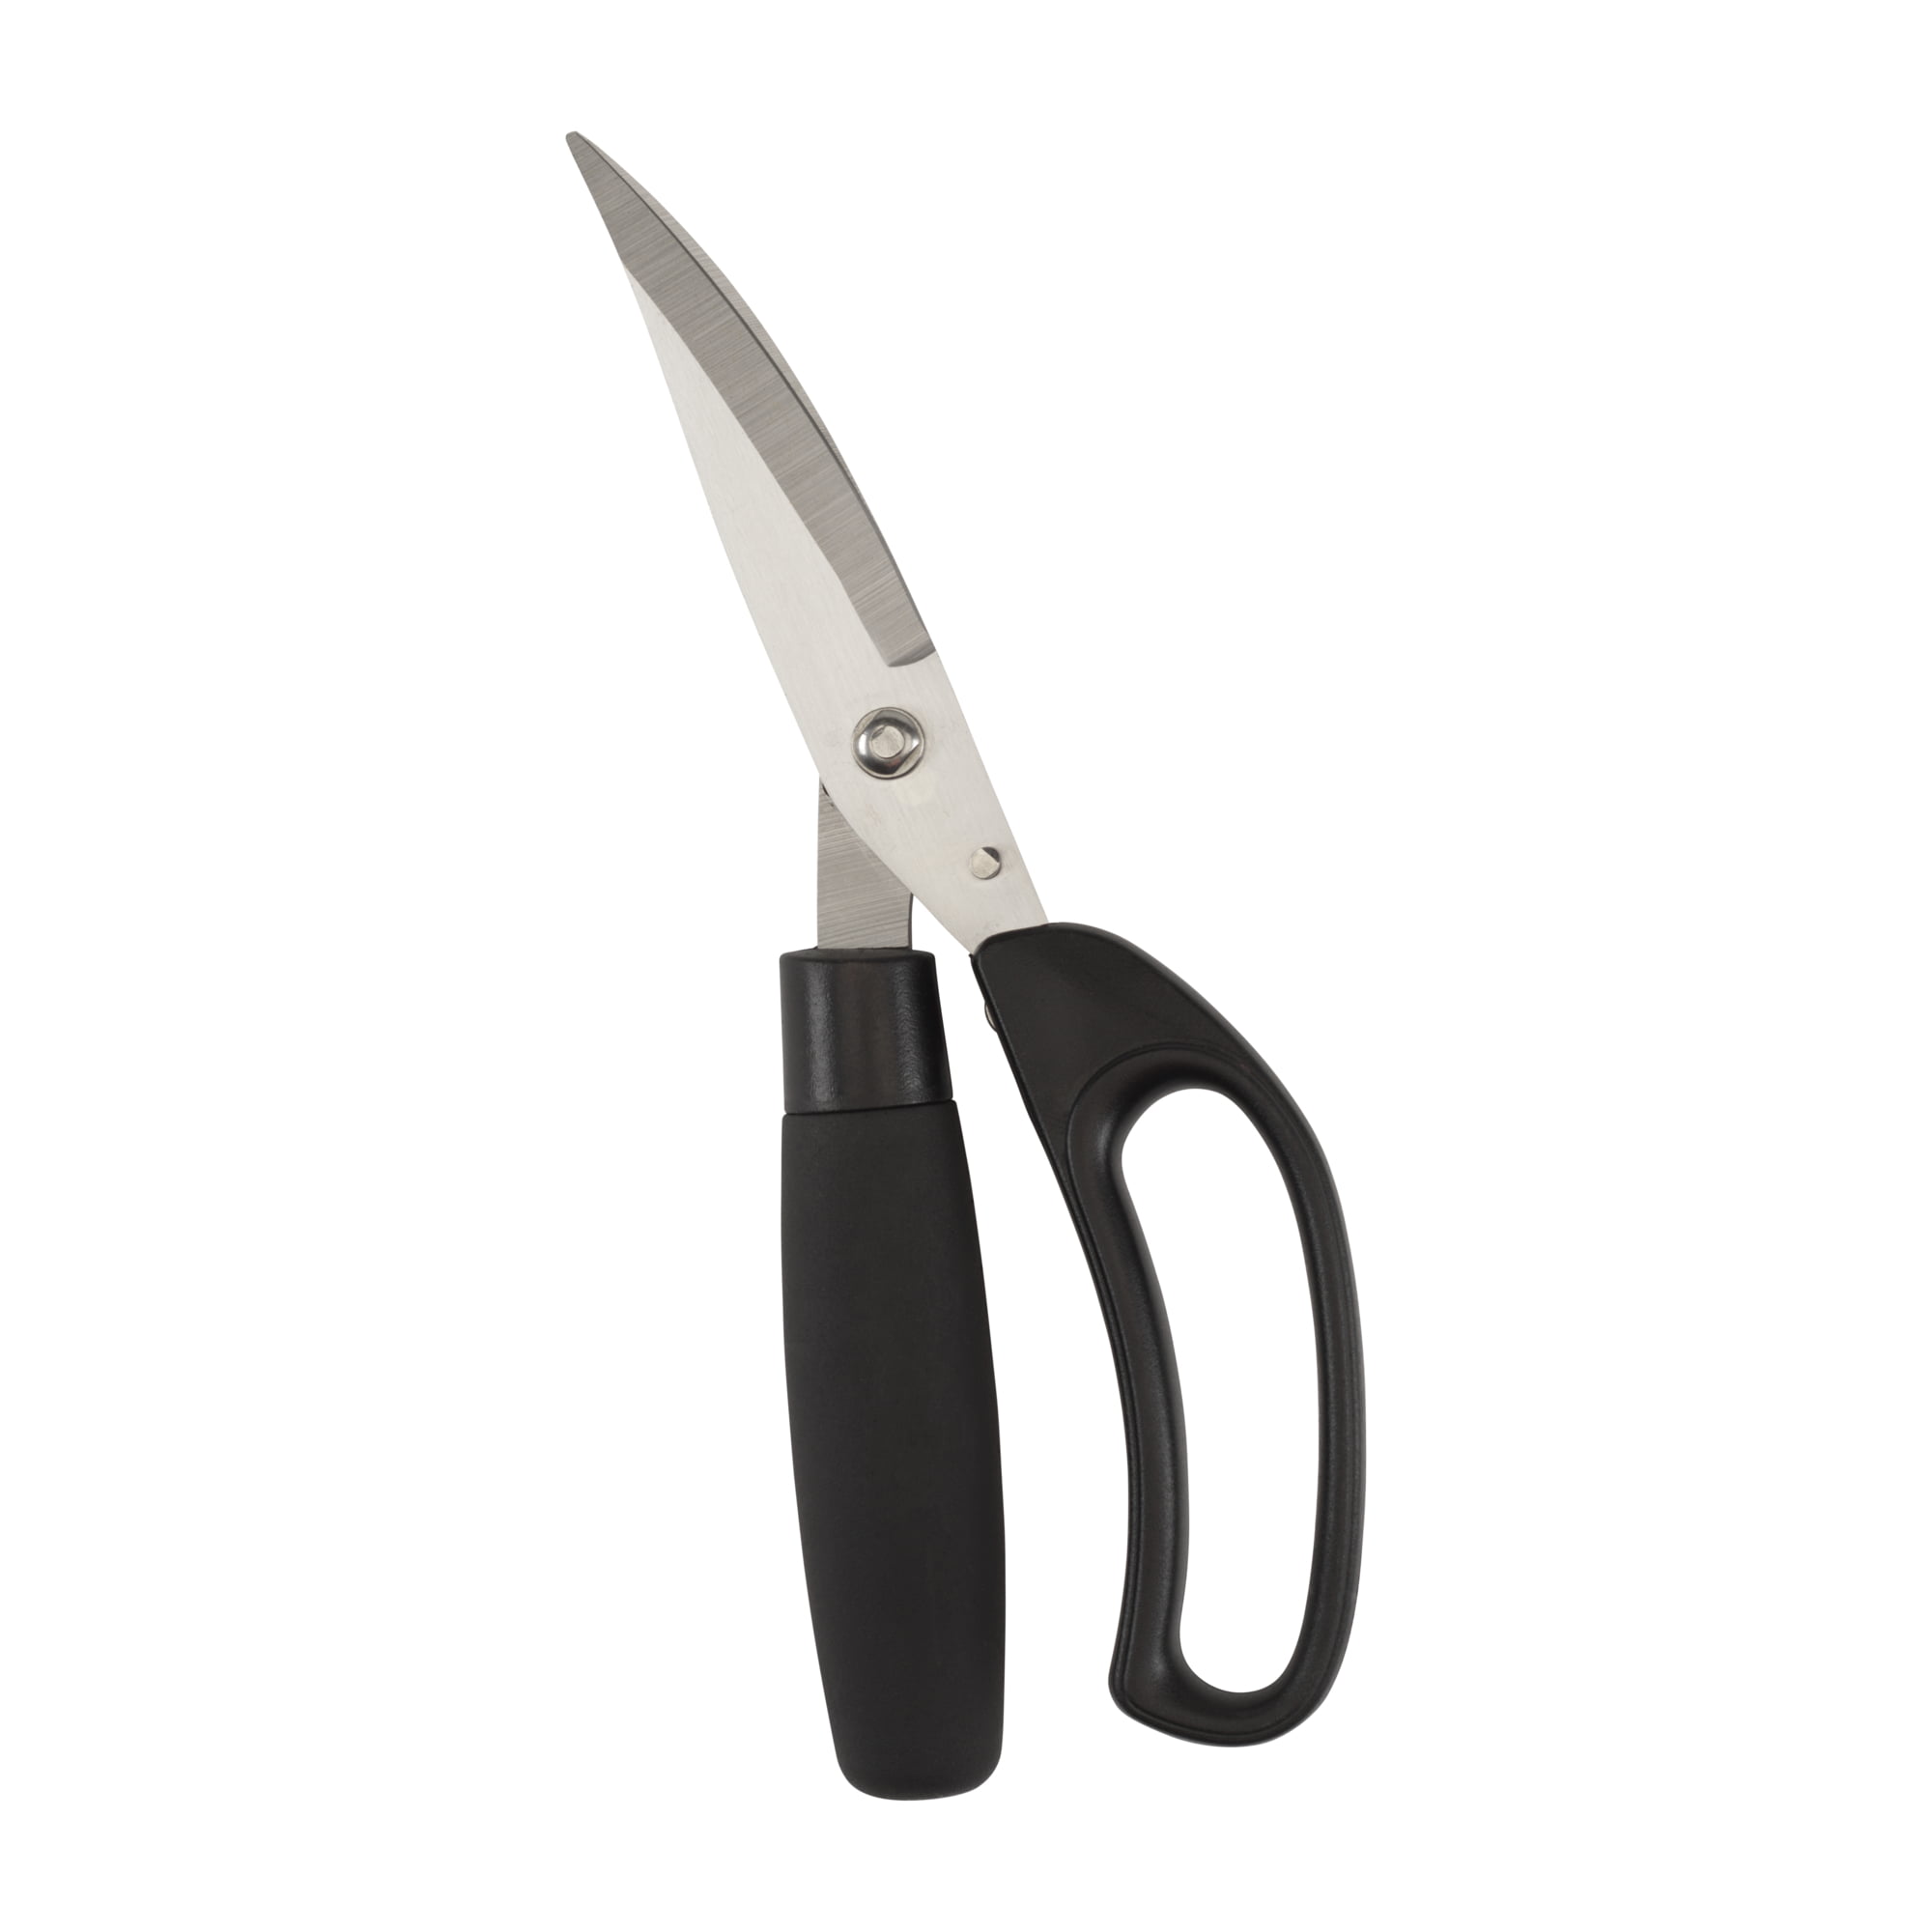 poultry shears, black handle - Whisk